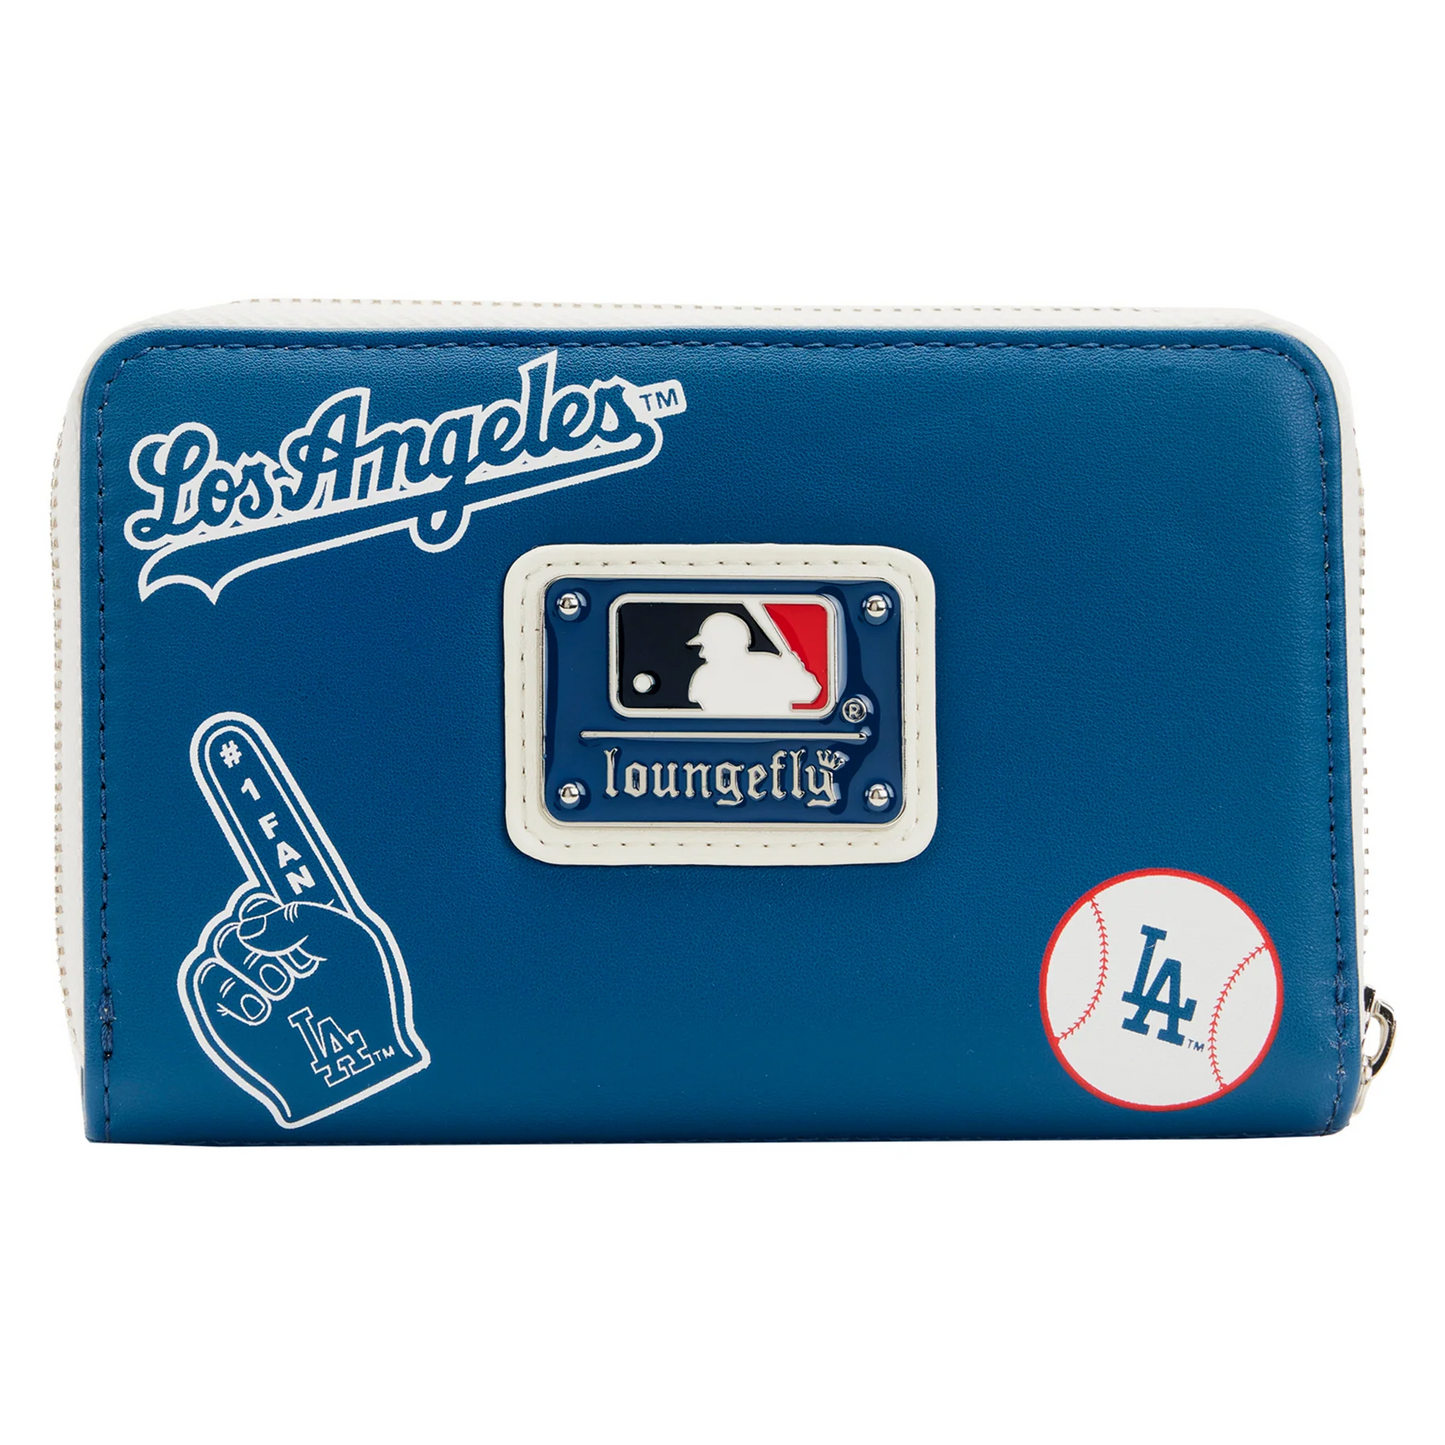 LOS ANGELES DODGERS LOUNGEFLY LOGO WALLET